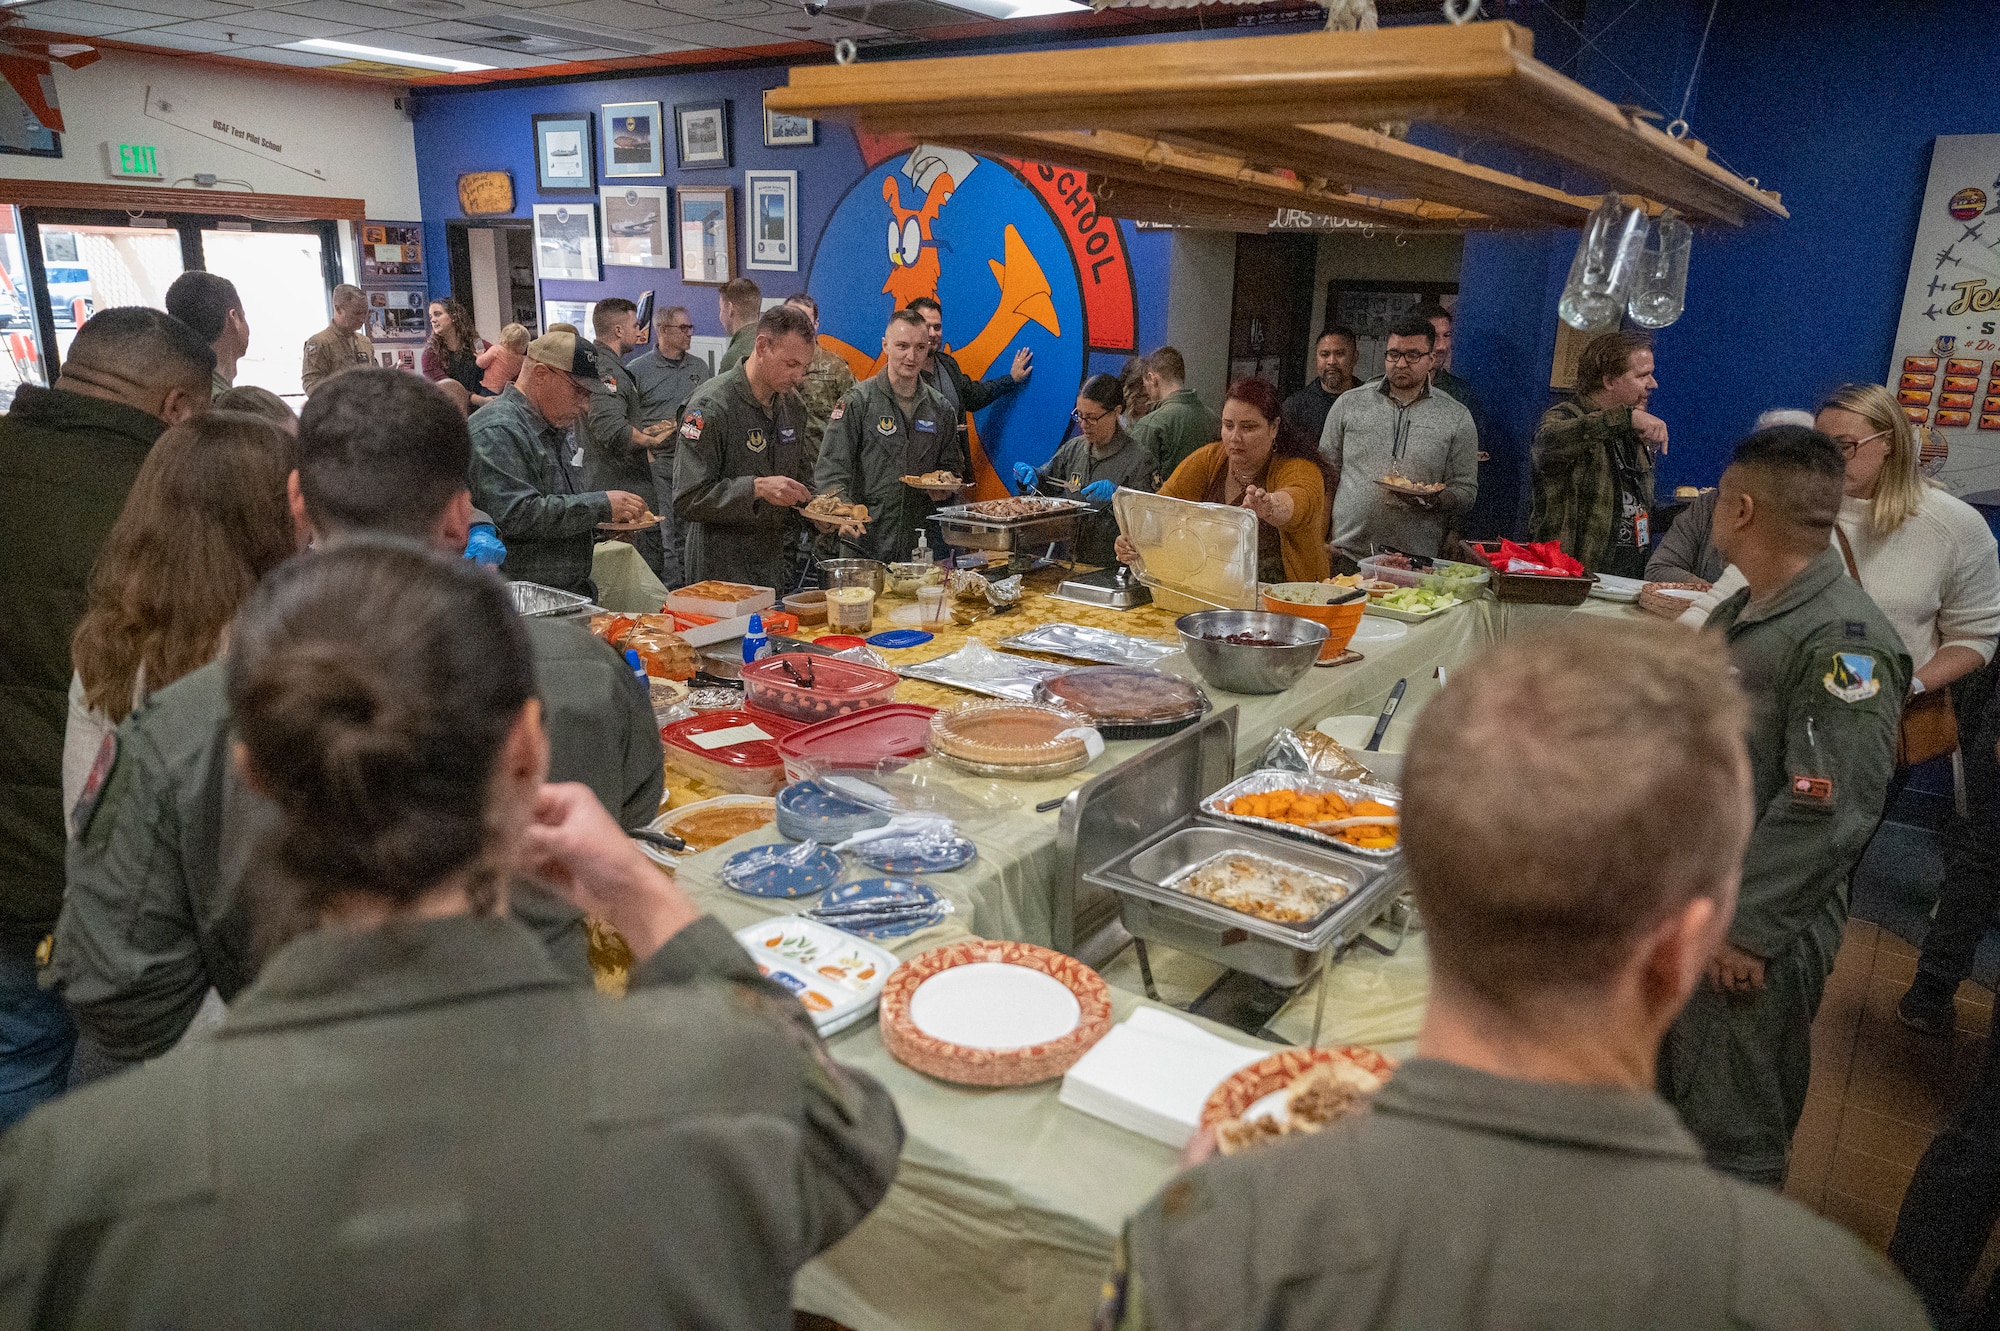 Not to miss out on the upcoming holidays, USAF TPS planned and hosted an American Thanksgiving feast with all the traditional fixings for the ROKAF and USAF TPS team. The culmination of a successful technical exchange, a Thanksgiving meal together was the perfect ending for shared experiences in flight test and cultural traditions.